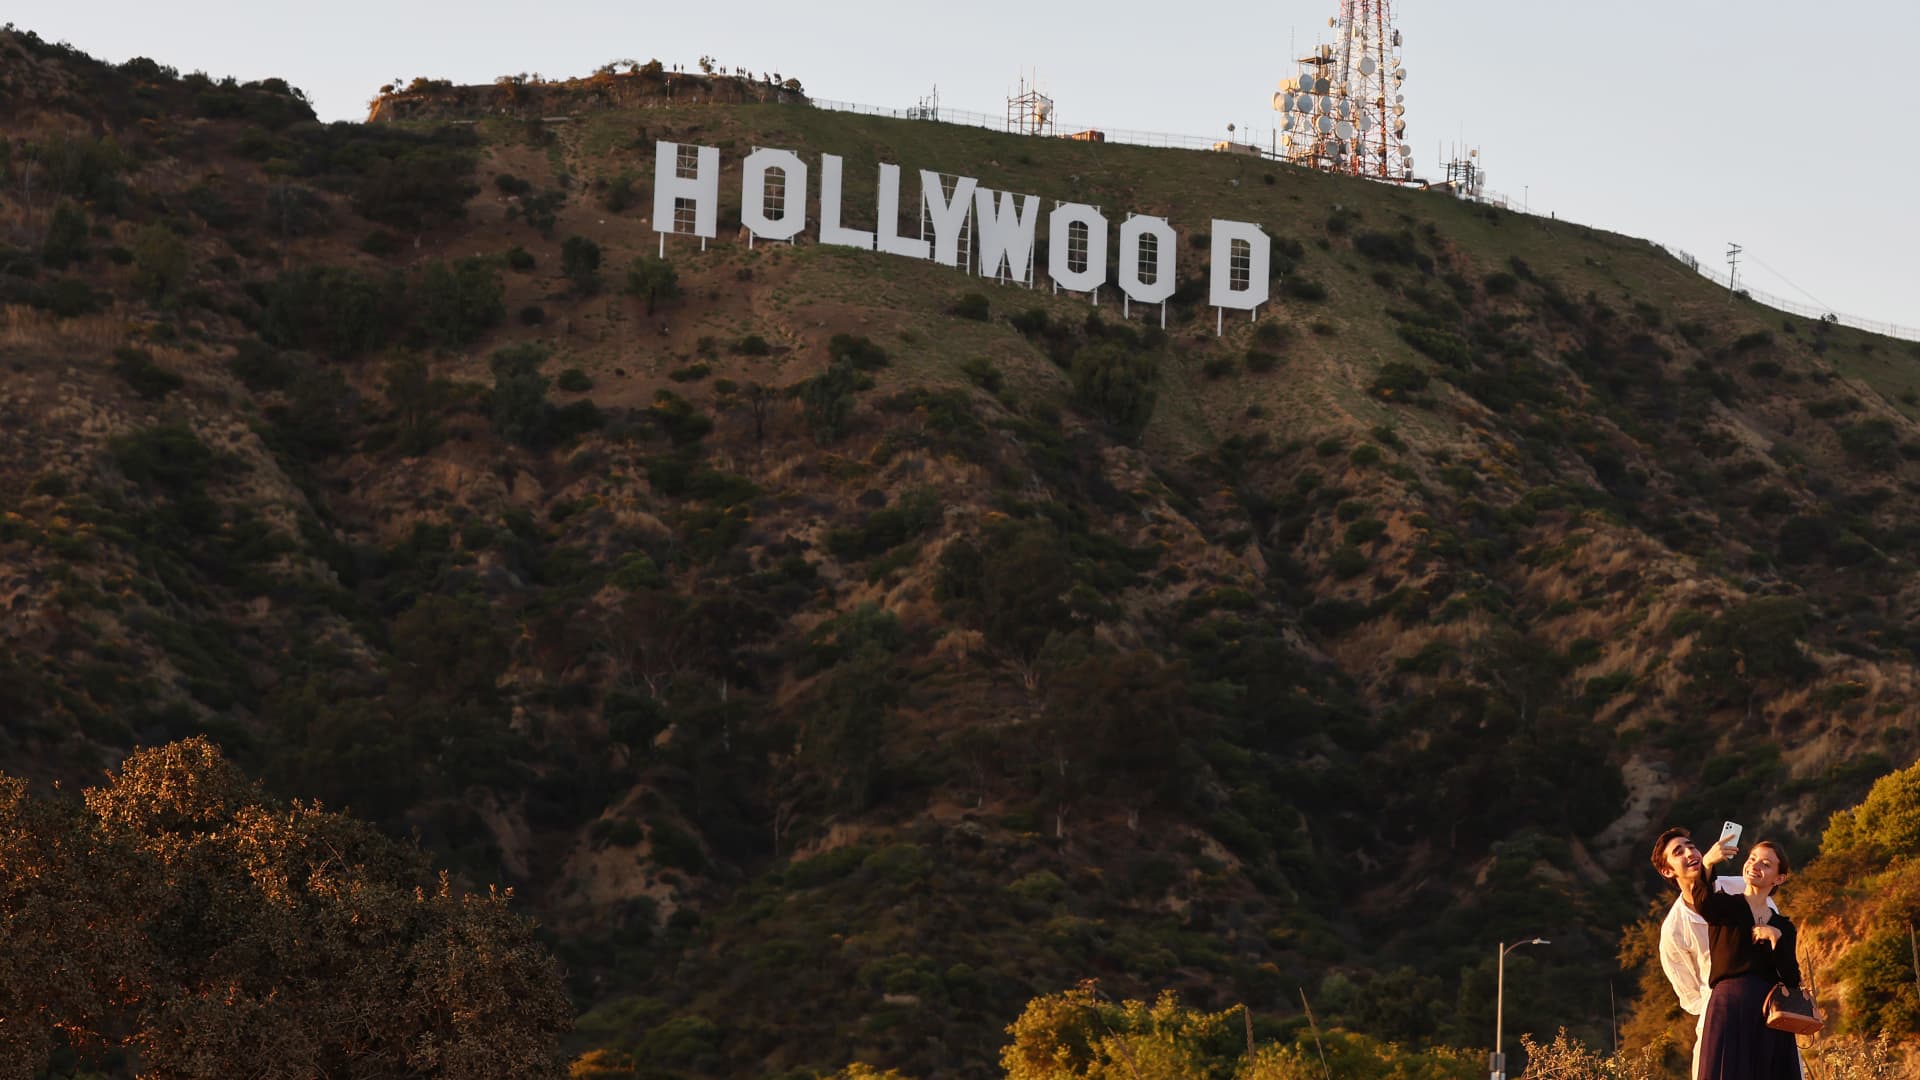 Hollywood strikes have already had a $3 billion impact on California’s financial system, experts say: It’s causing ‘a lot of hardship’